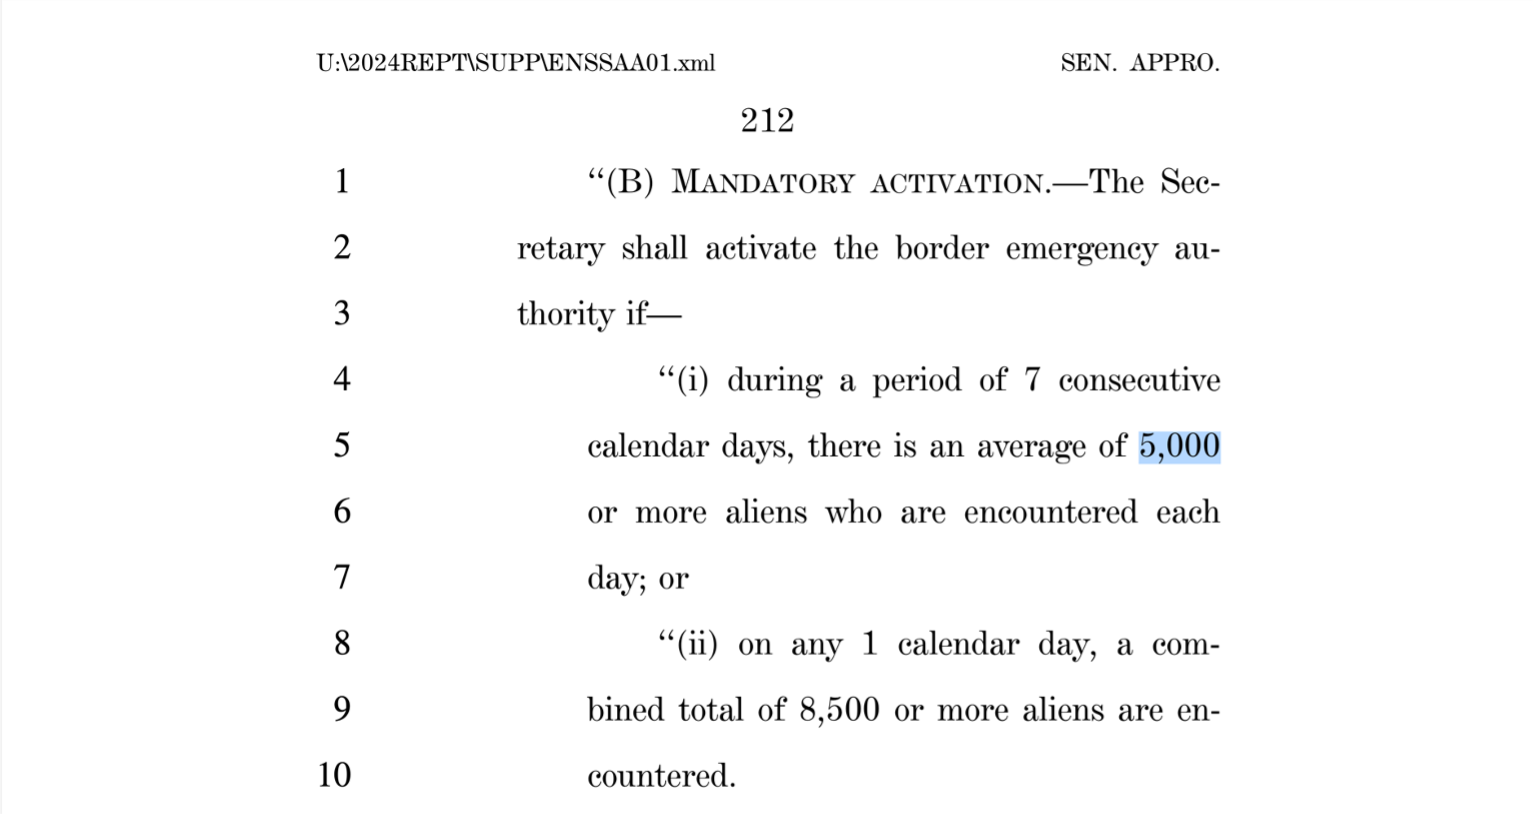 Bill text showing limit of 8,500 migrants allowed per day